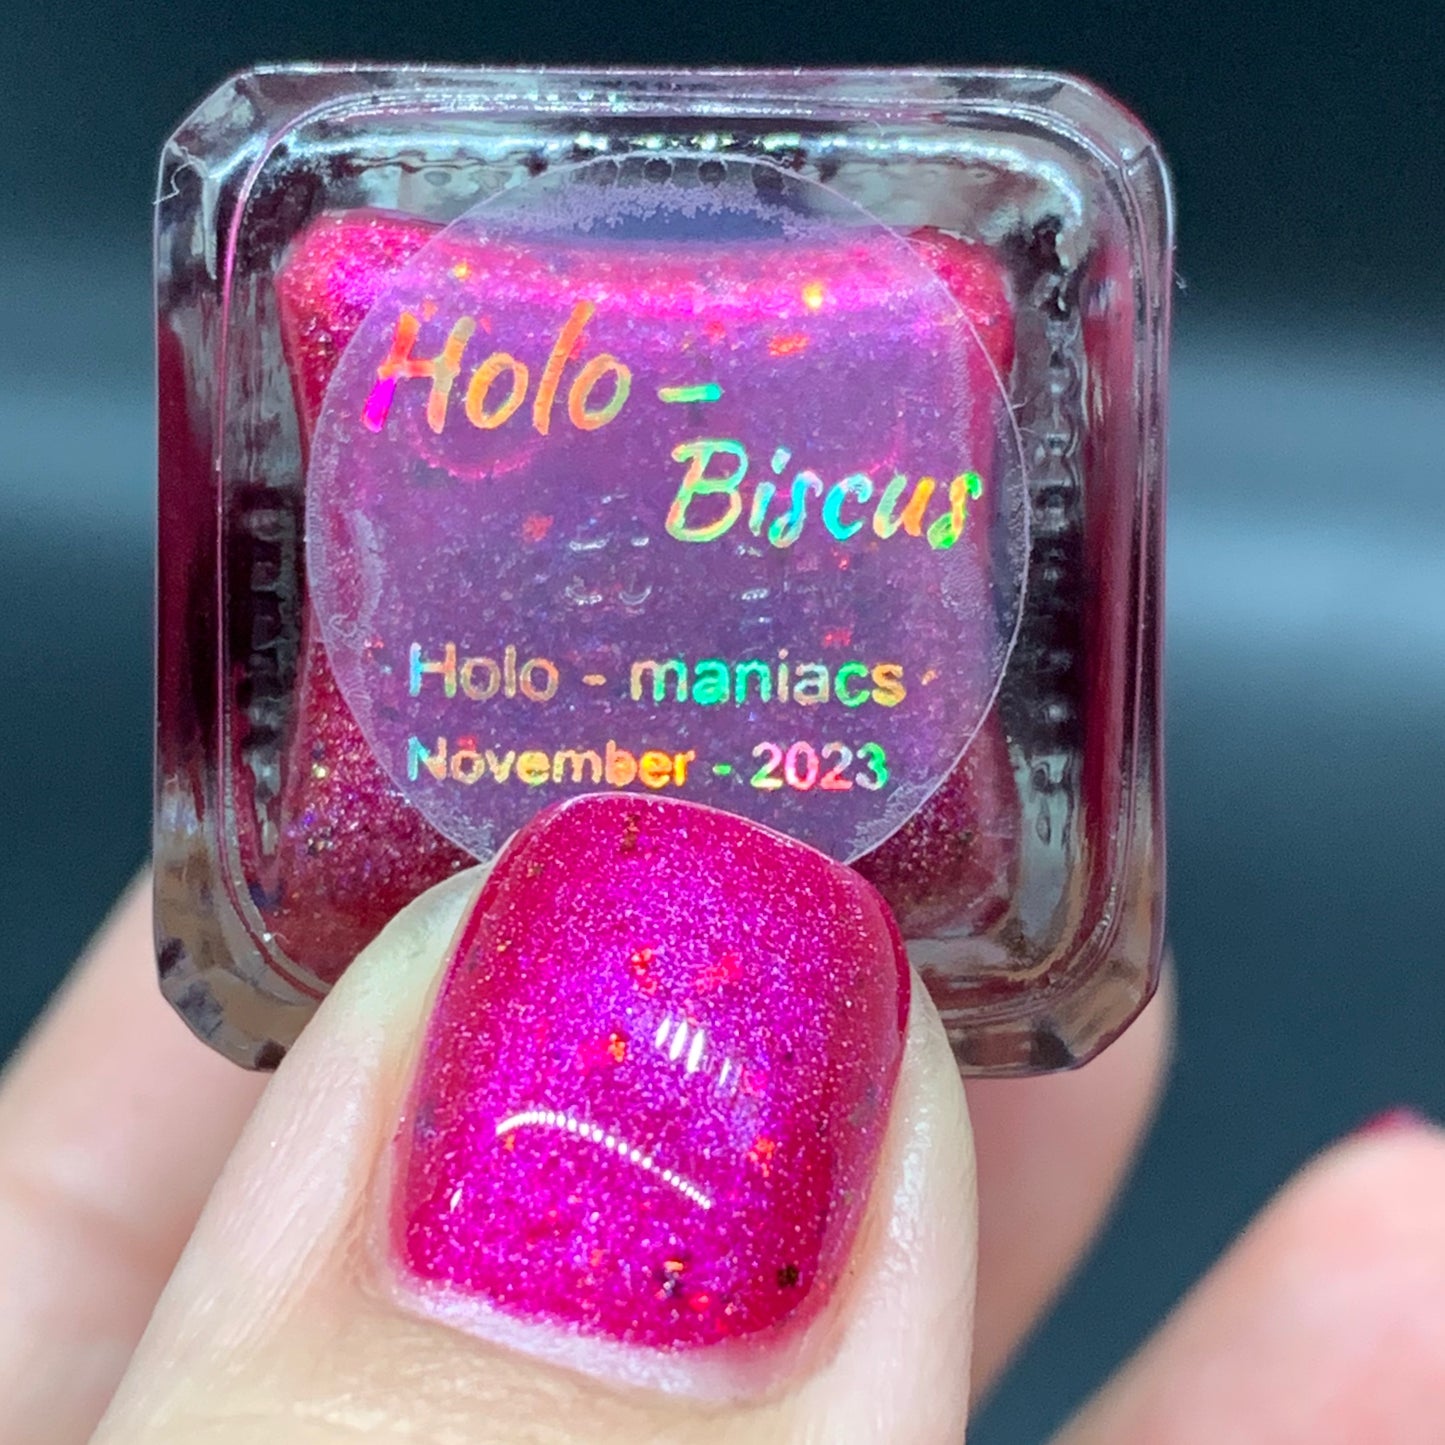 Holo-Biscus